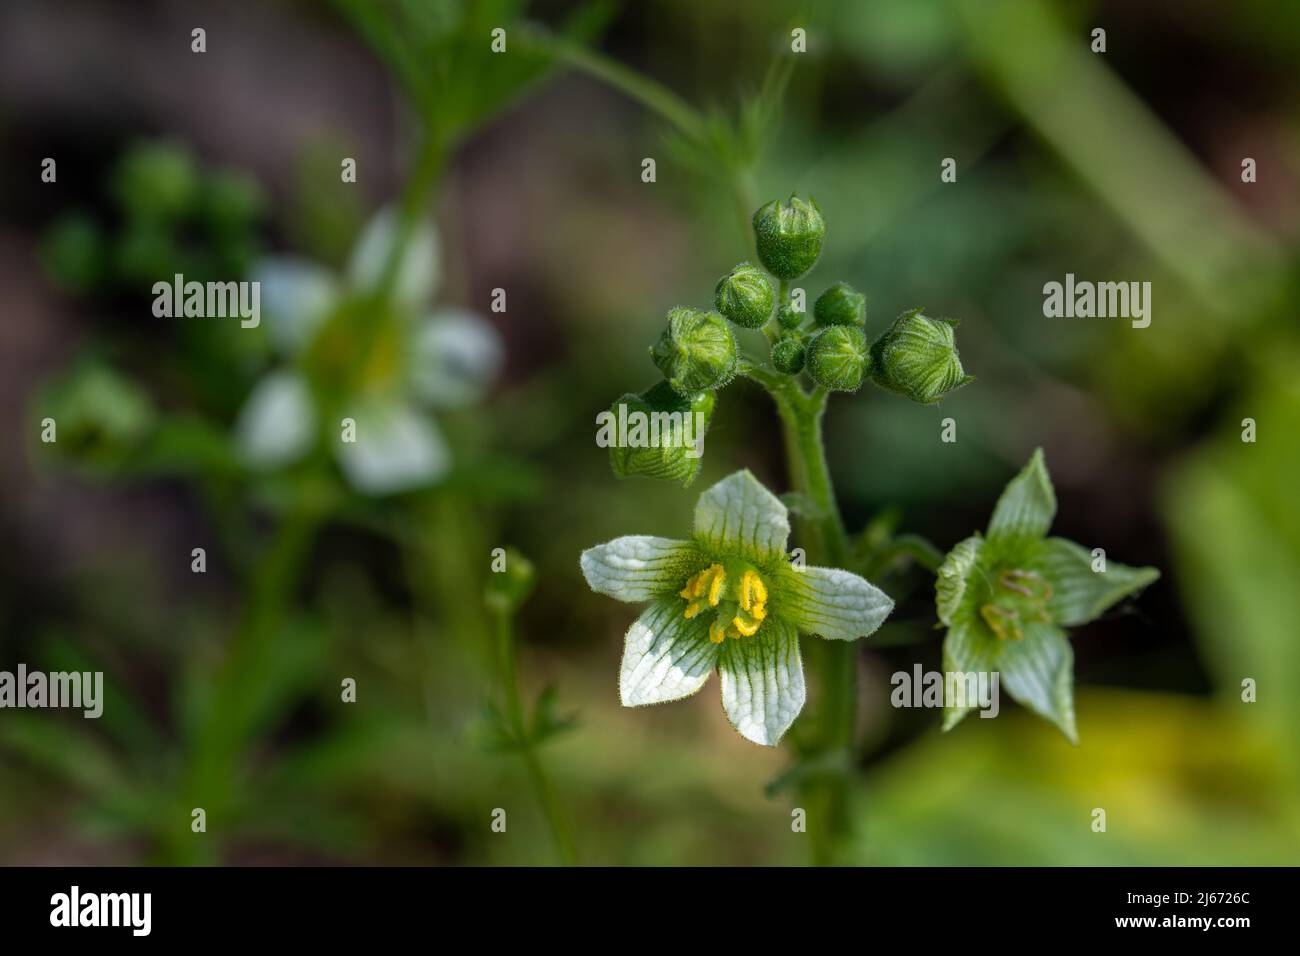 White flowers of a wild toxic plant (Bryonia dioica) Stock Photo